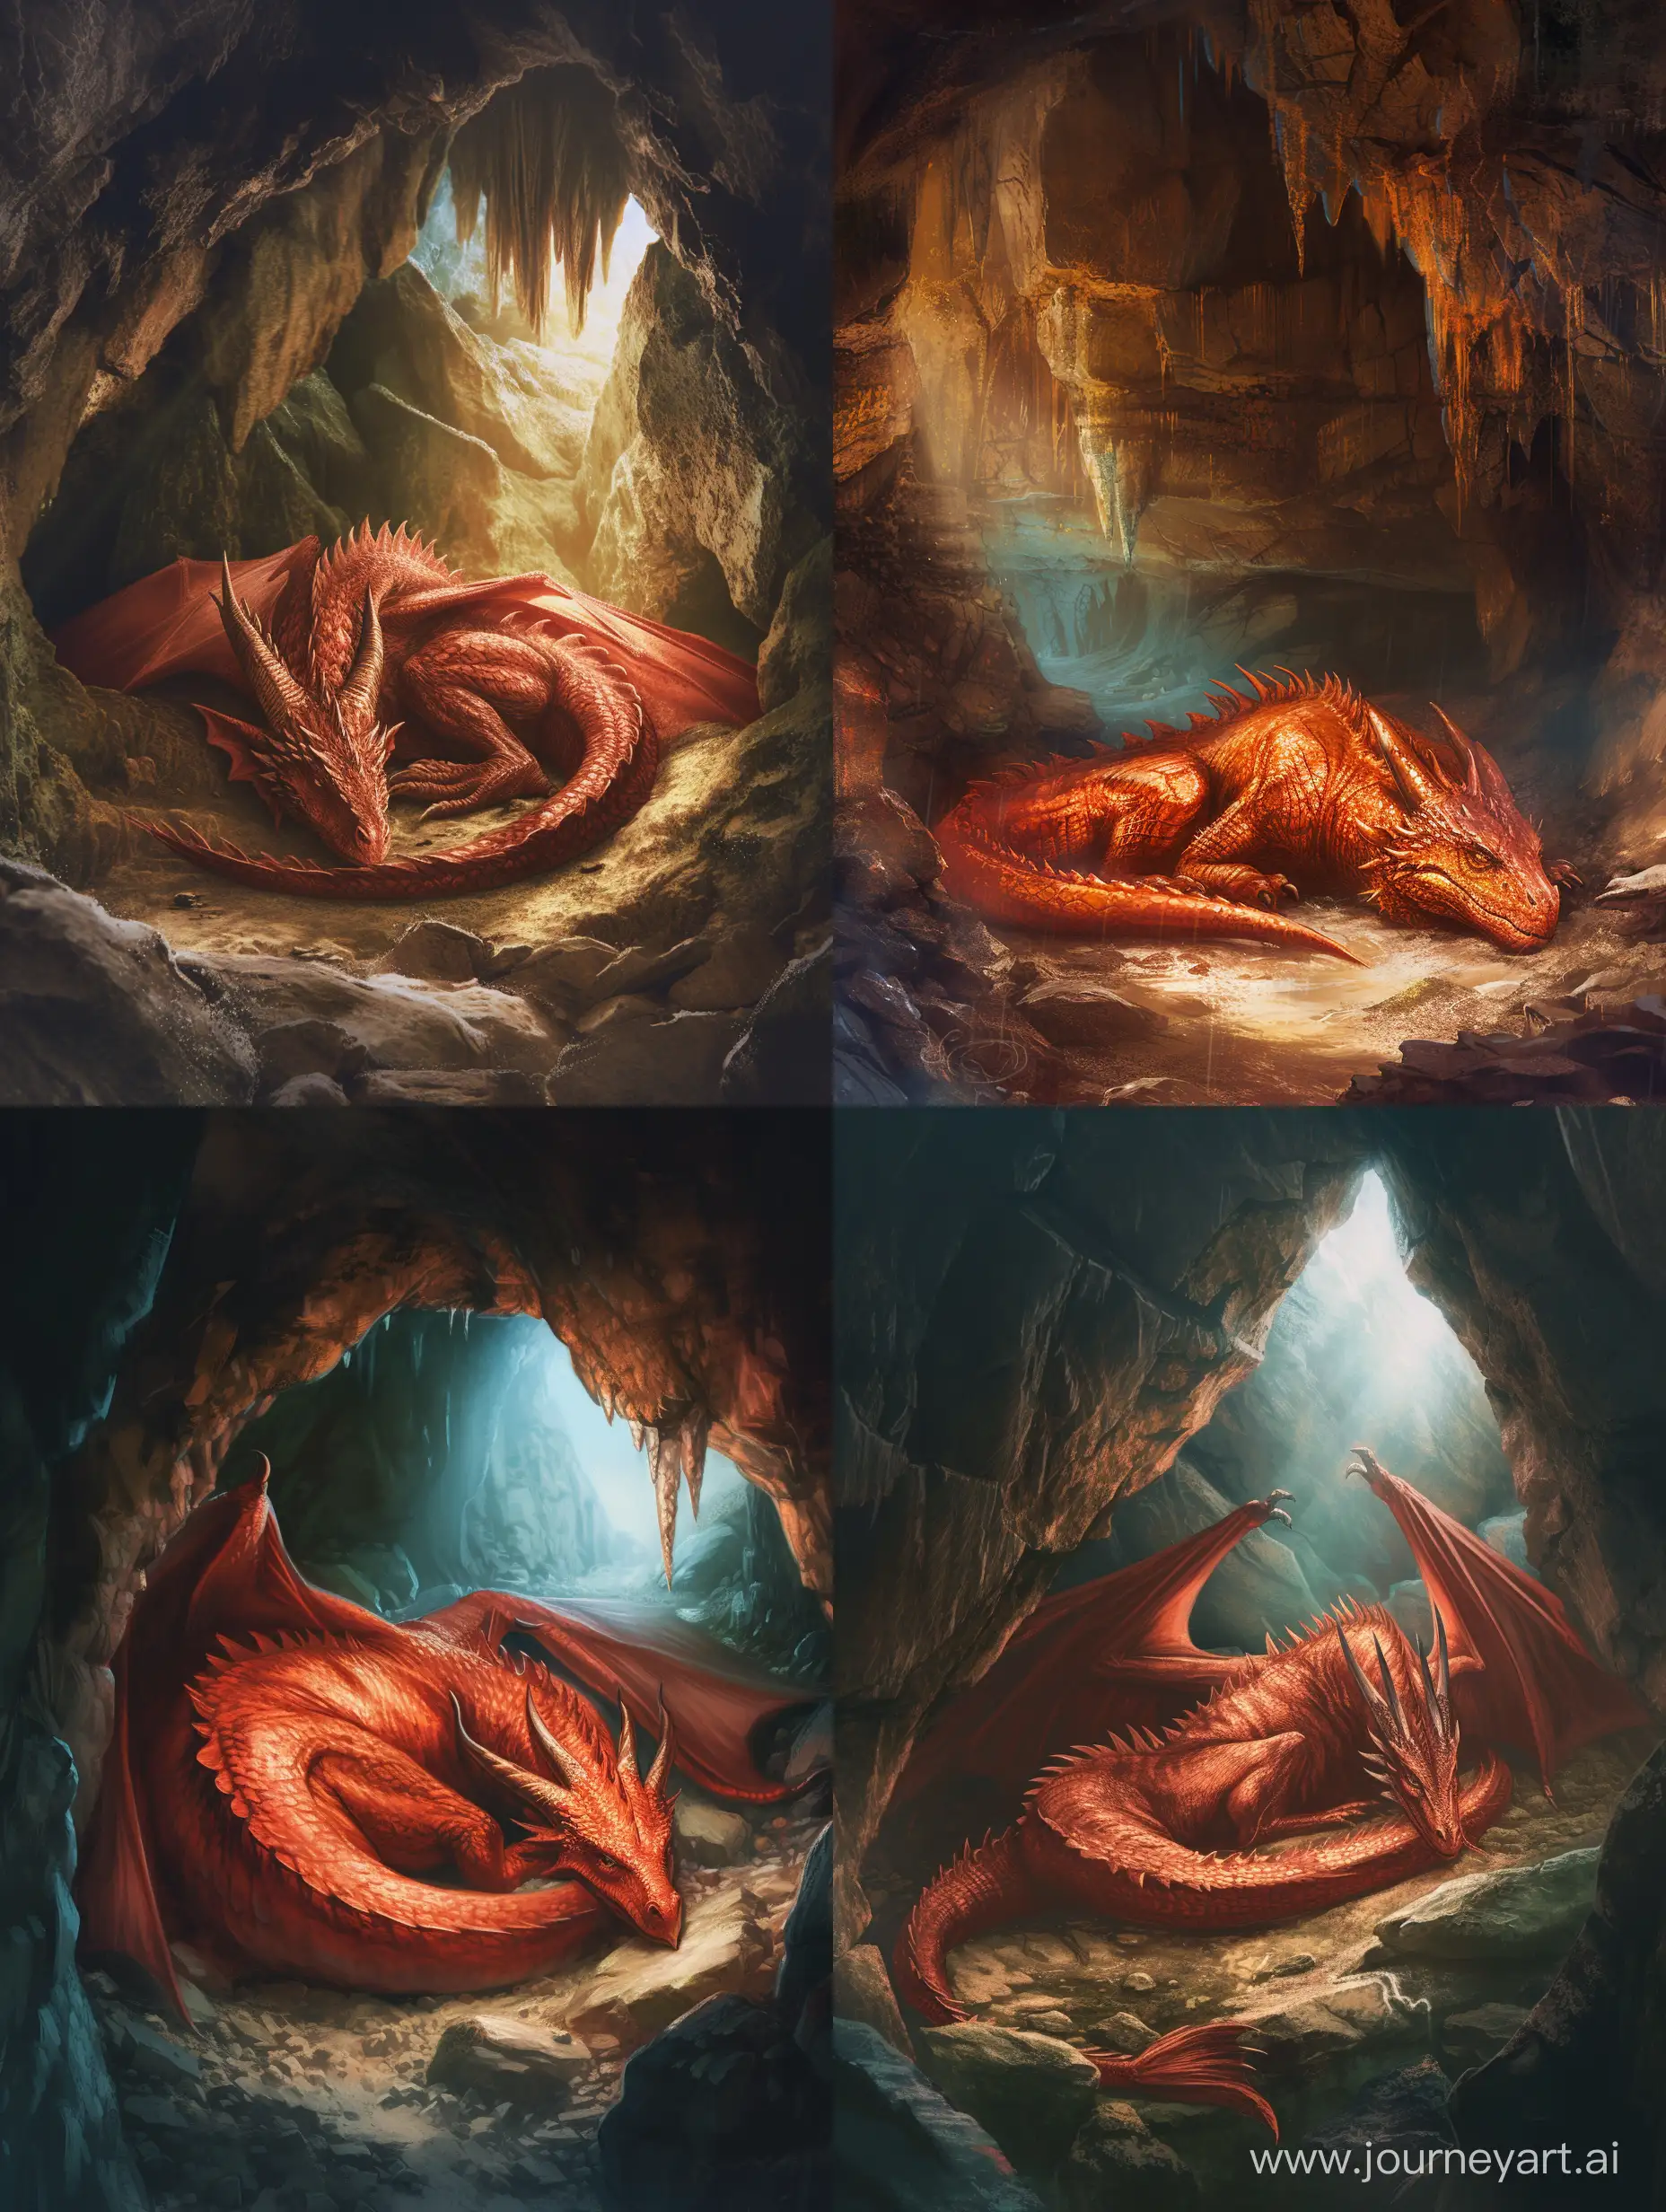 Create a captivating graphical representation of a majestic red dragon lying in a mystical cave. Explore lighting, texture, and composition to convey the awe-inspiring presence of the dragon within its lair. Consider incorporating elements that evoke a sense of mystery and adventure.